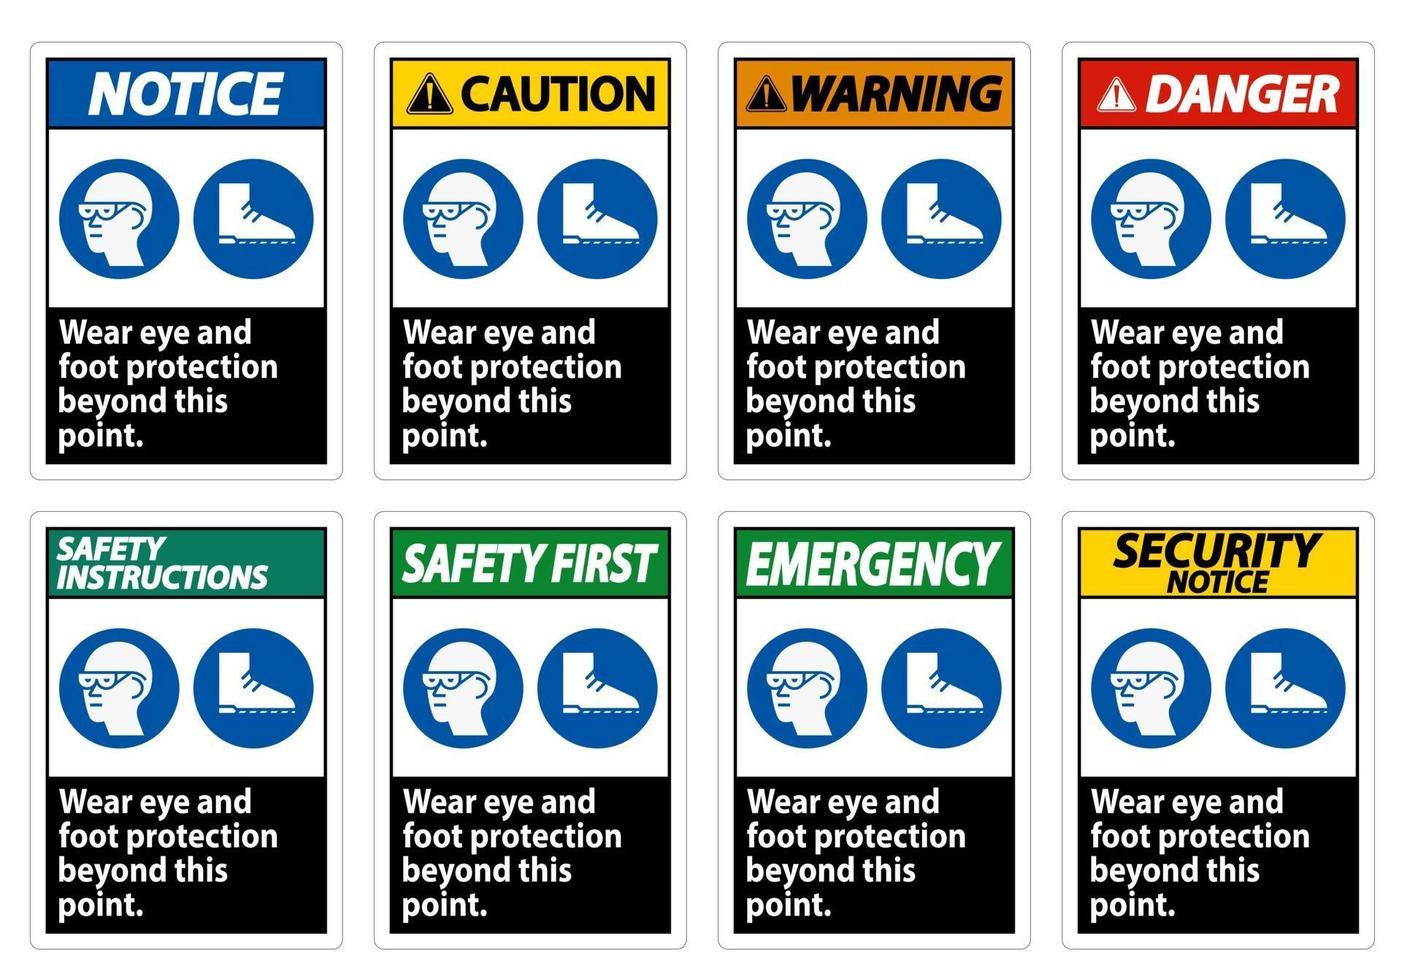 Wear Eye And Foot Protection Beyond This Point With PPE Symbols vector